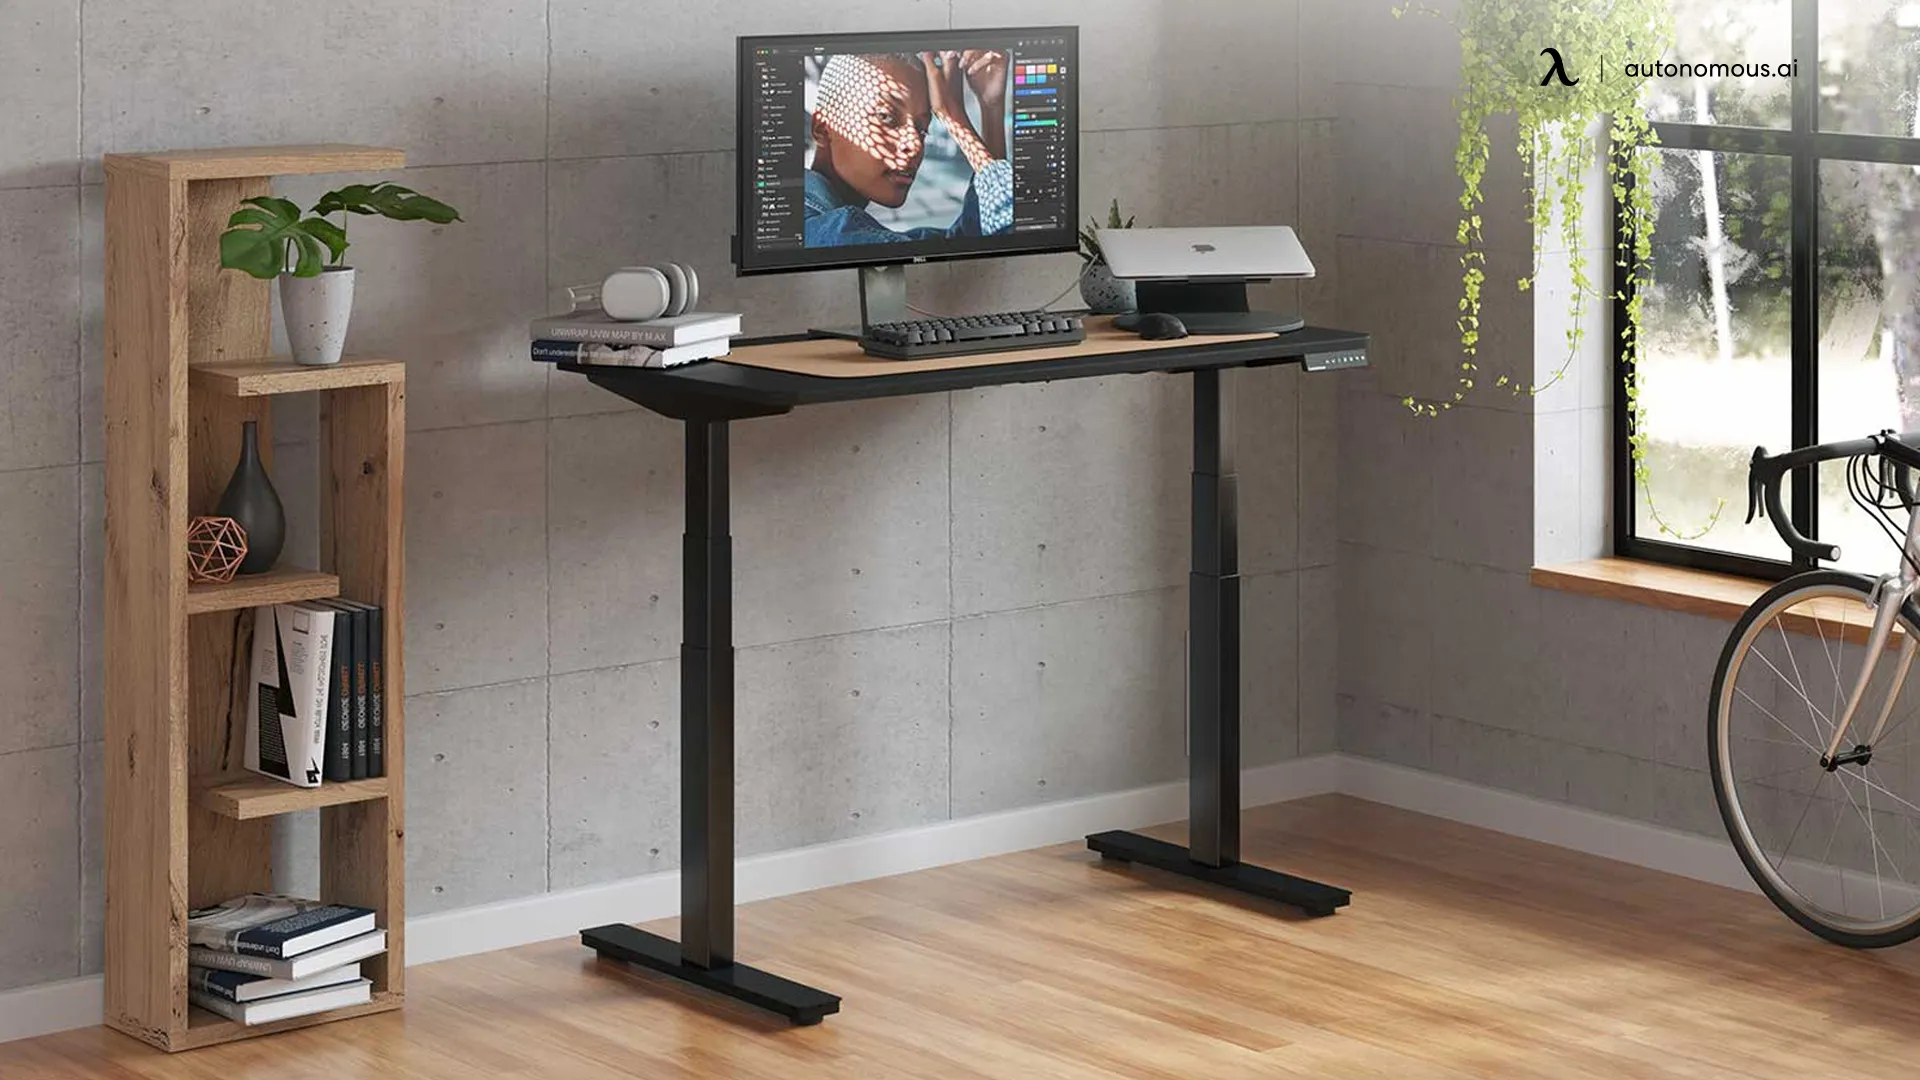 Top 3 Stores to Buy Office Adjustable Tables in the US